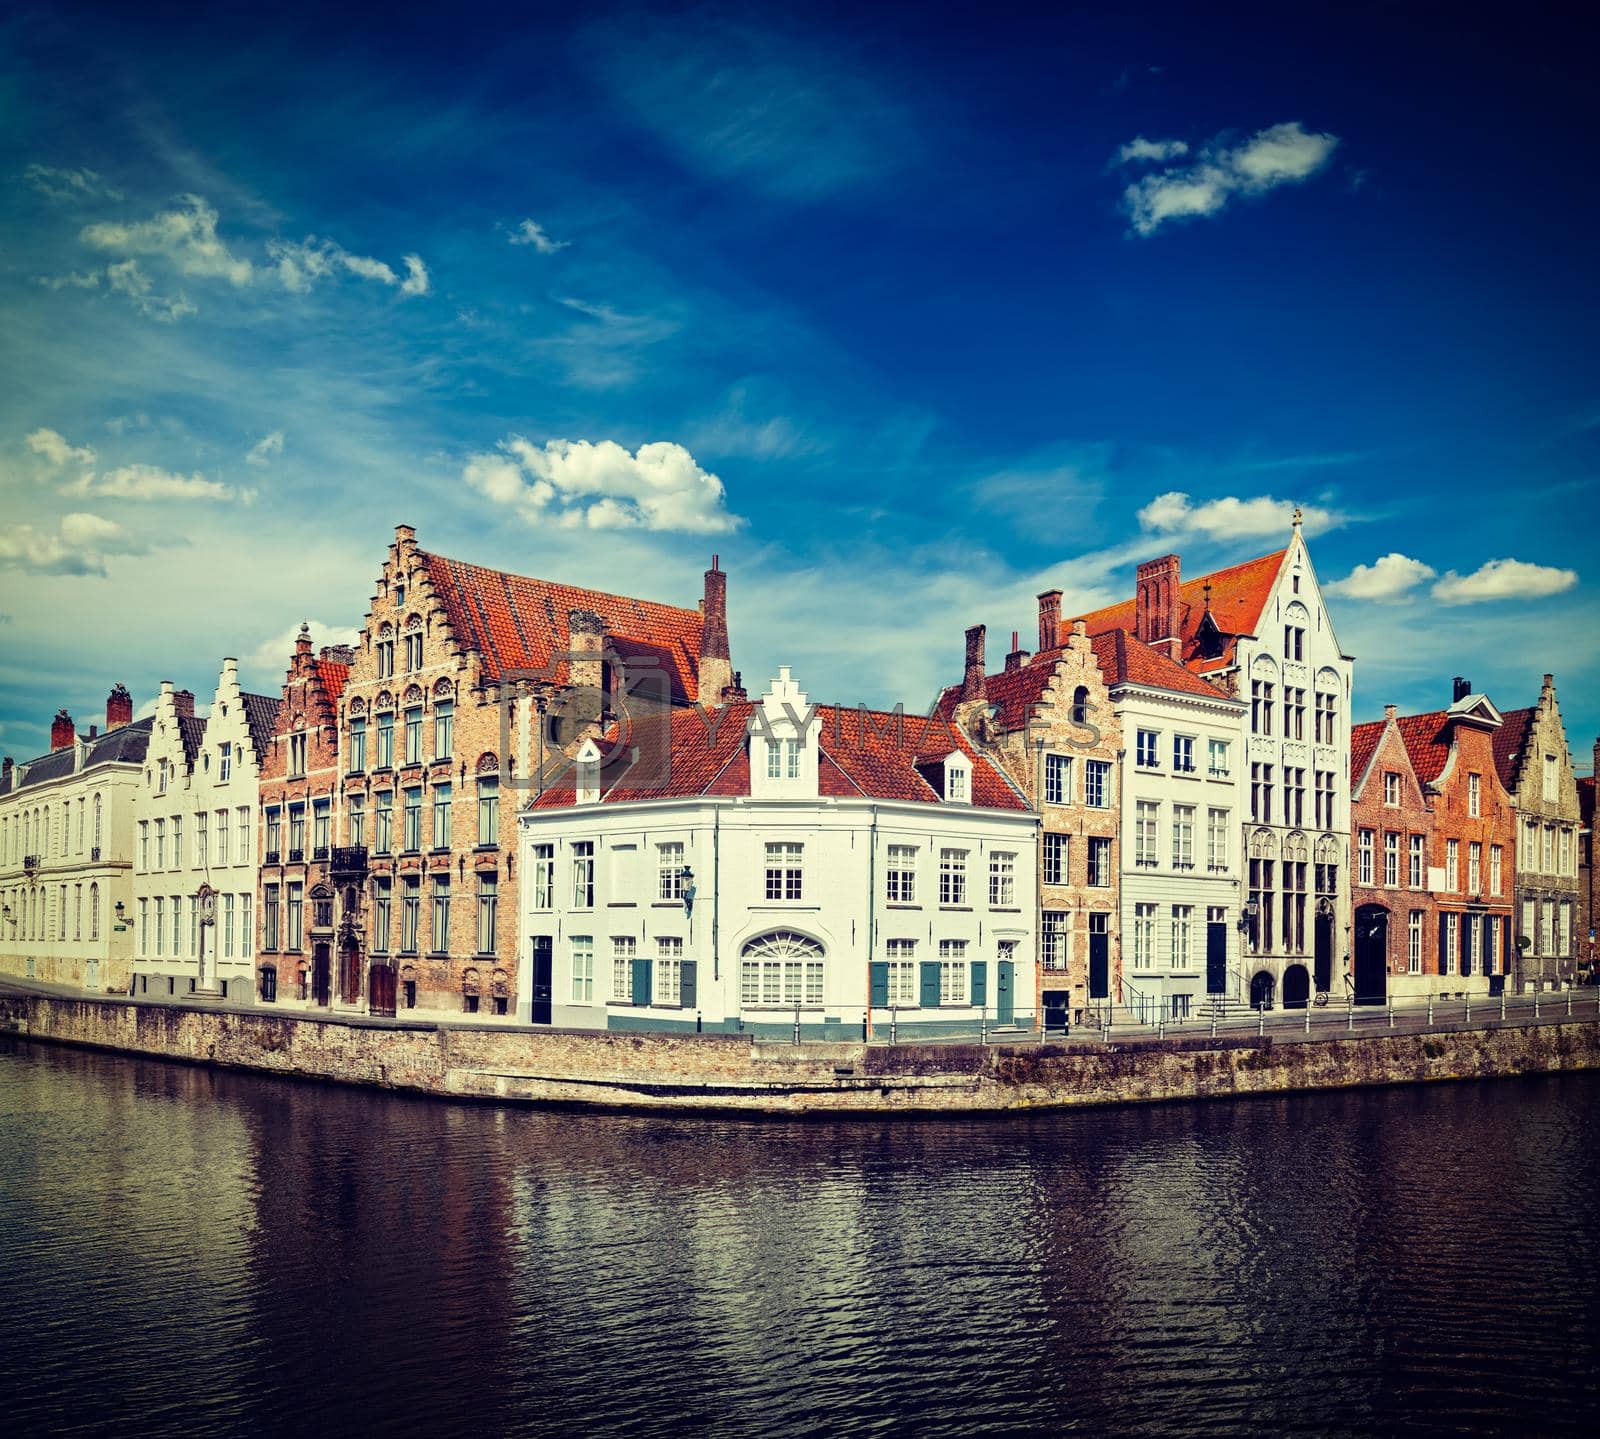 Royalty free image of Bruges canals by dimol